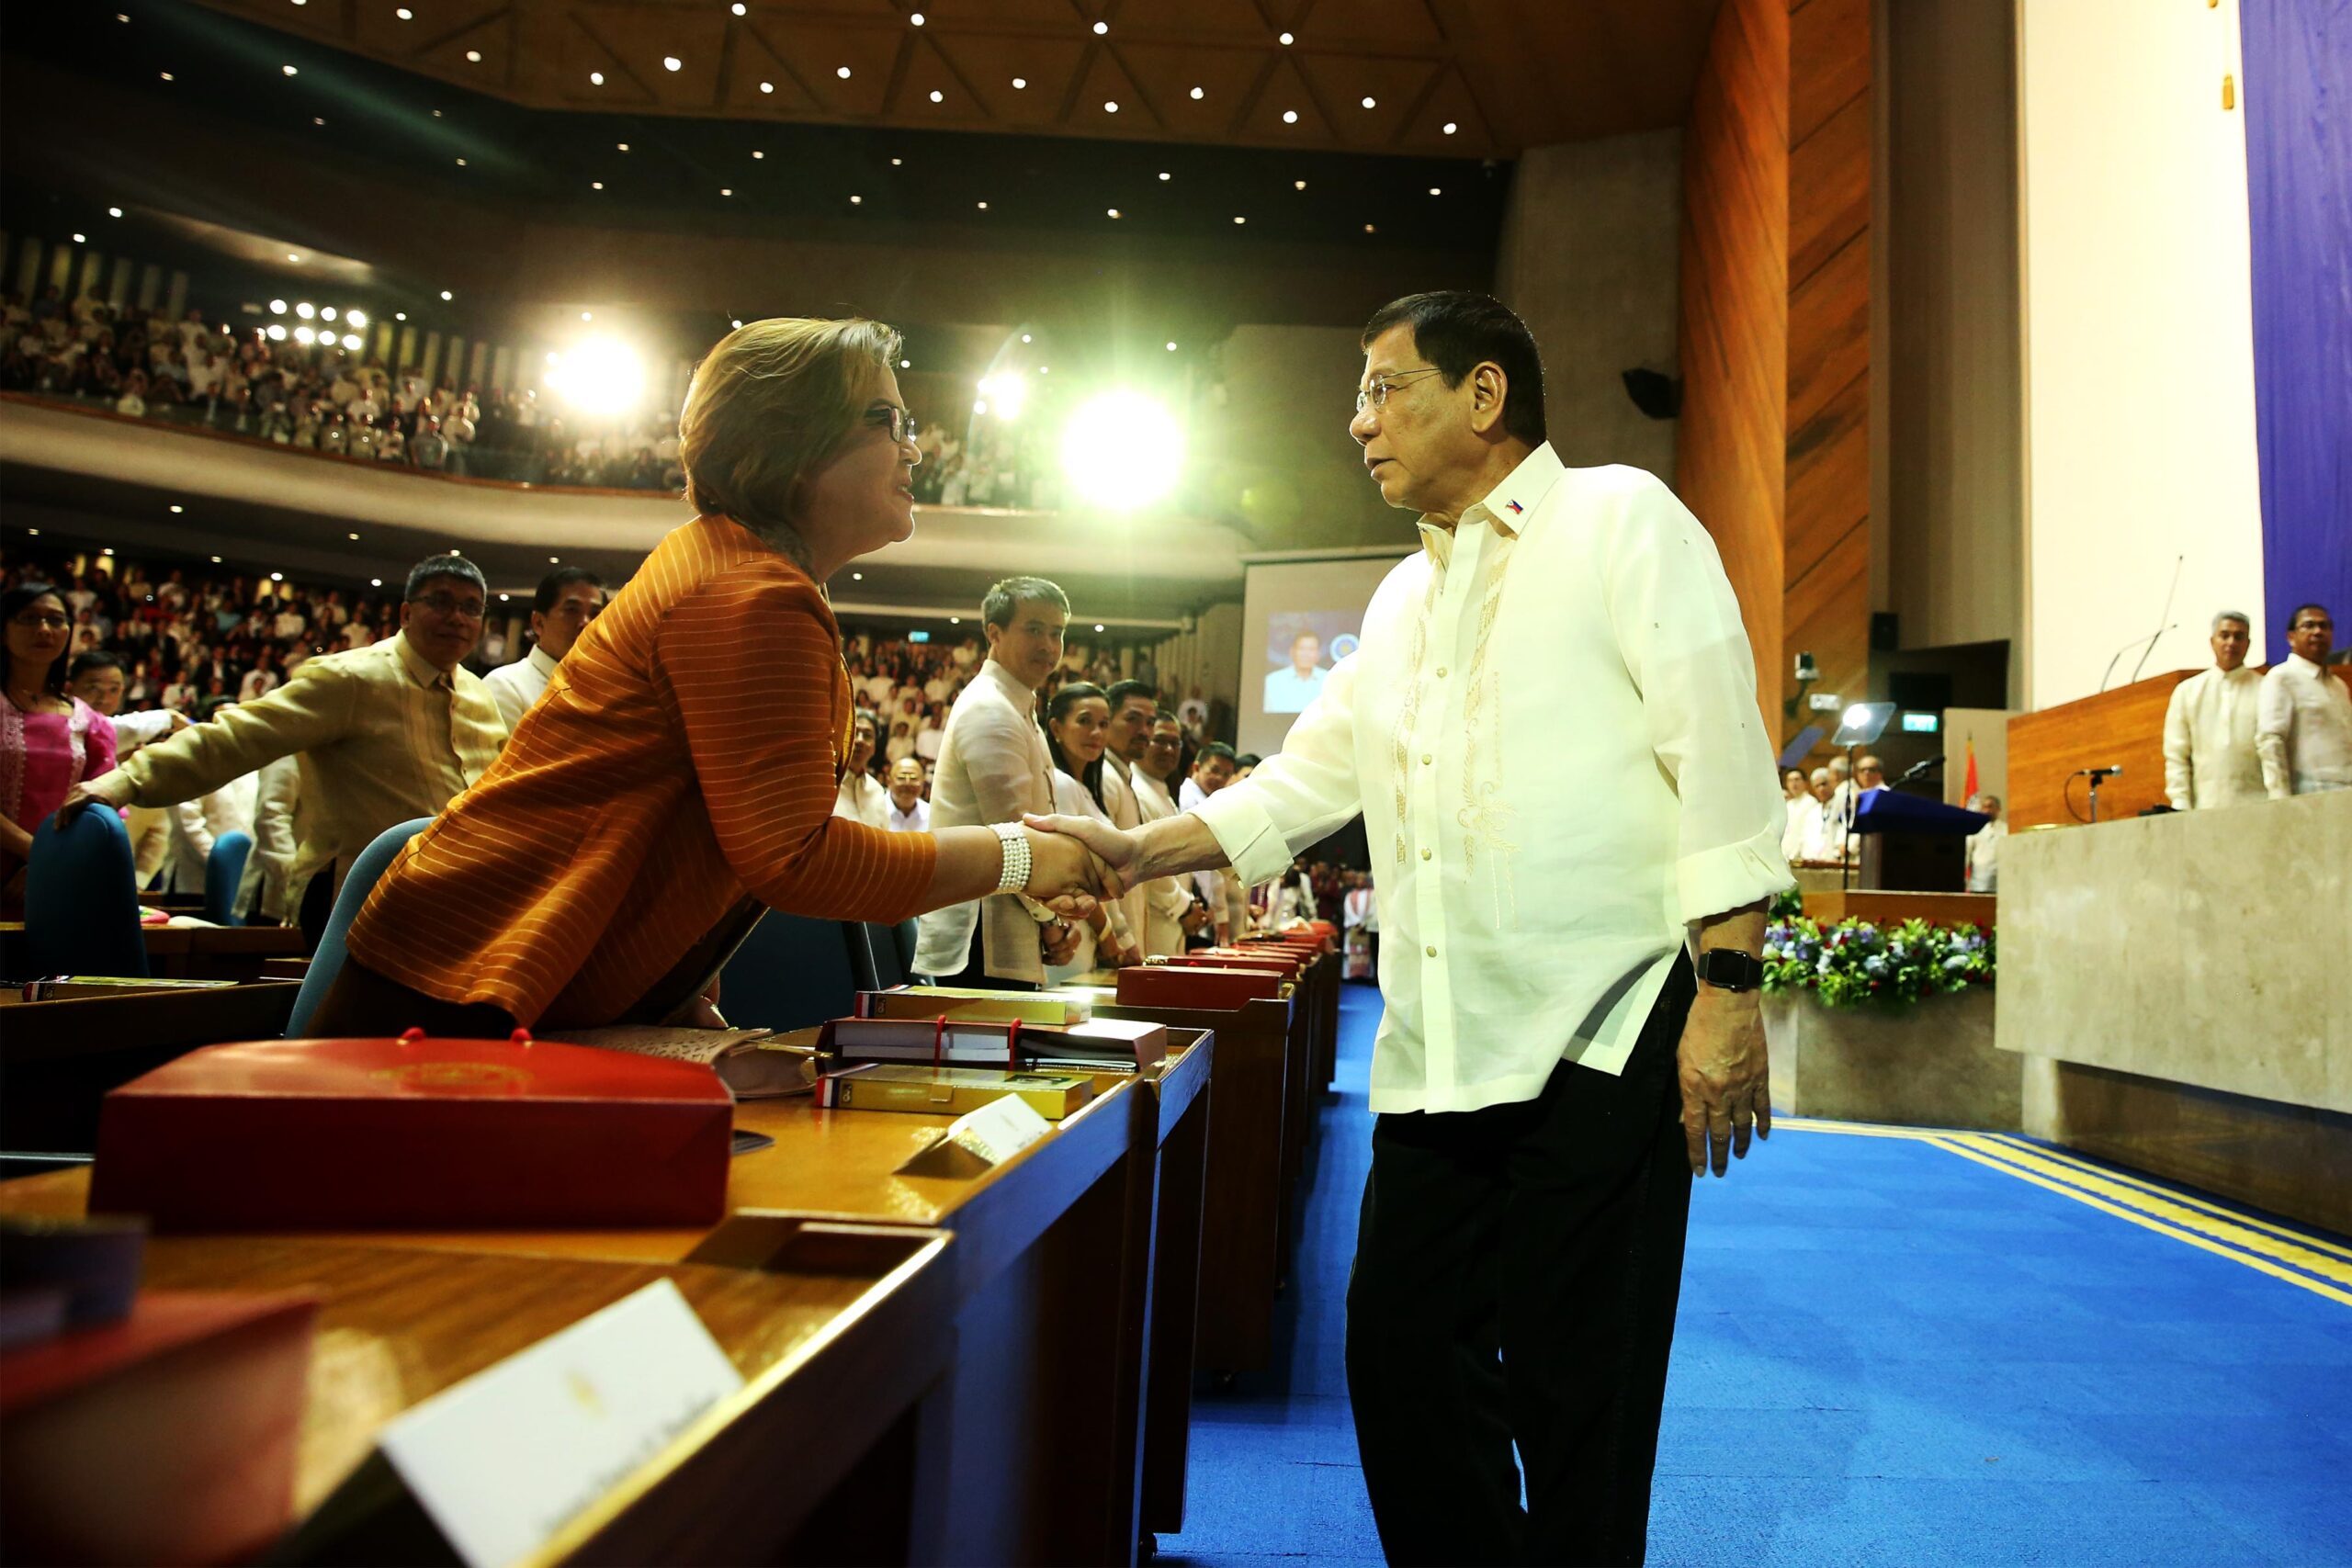 WATCH: De Lima ‘surprised’ by ‘friendly’ Duterte greeting at SONA